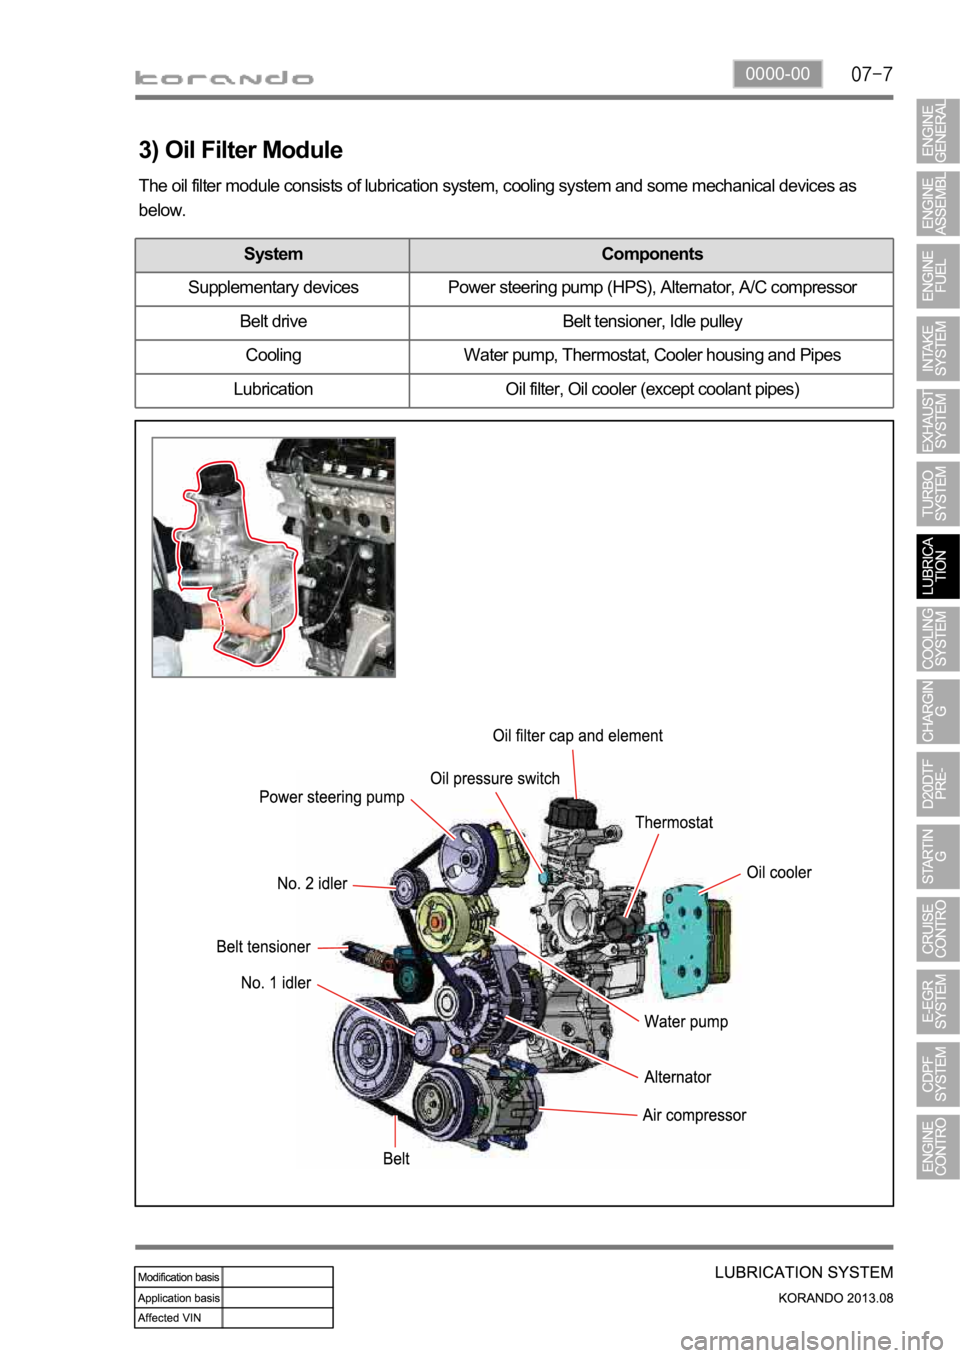 SSANGYONG KORANDO 2013  Service Manual 0000-00
3) Oil Filter Module
The oil filter module consists of lubrication system, cooling system and some mechanical devices as 
below.
System Components
Supplementary devices Power steering pump (HP